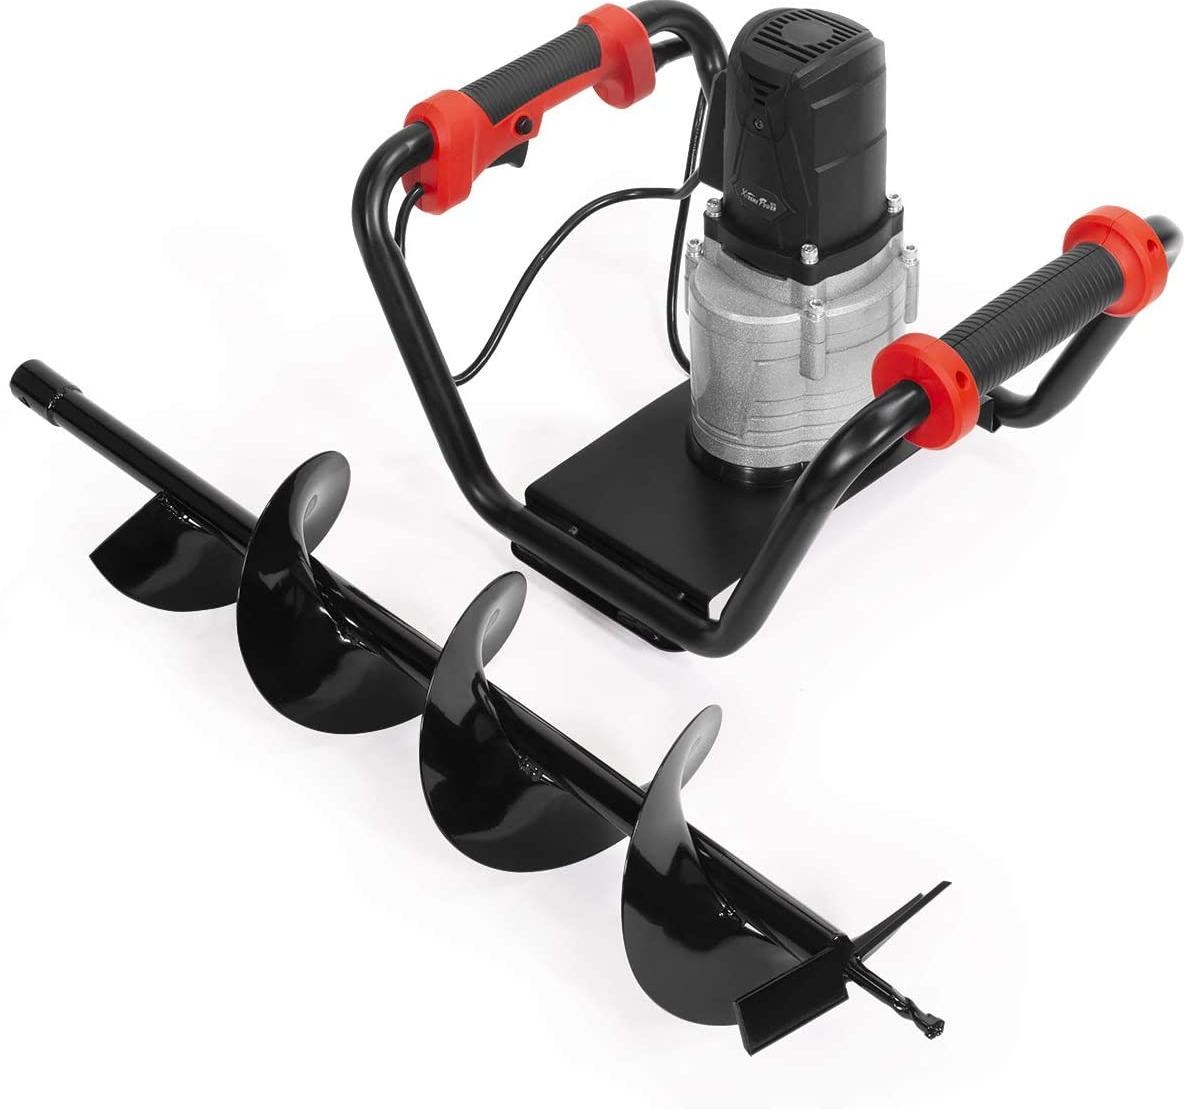 XtremepowerUS Pro-Series 1500W Electric Post Hole Digger Powerhead include 6" Digging Auger Bit